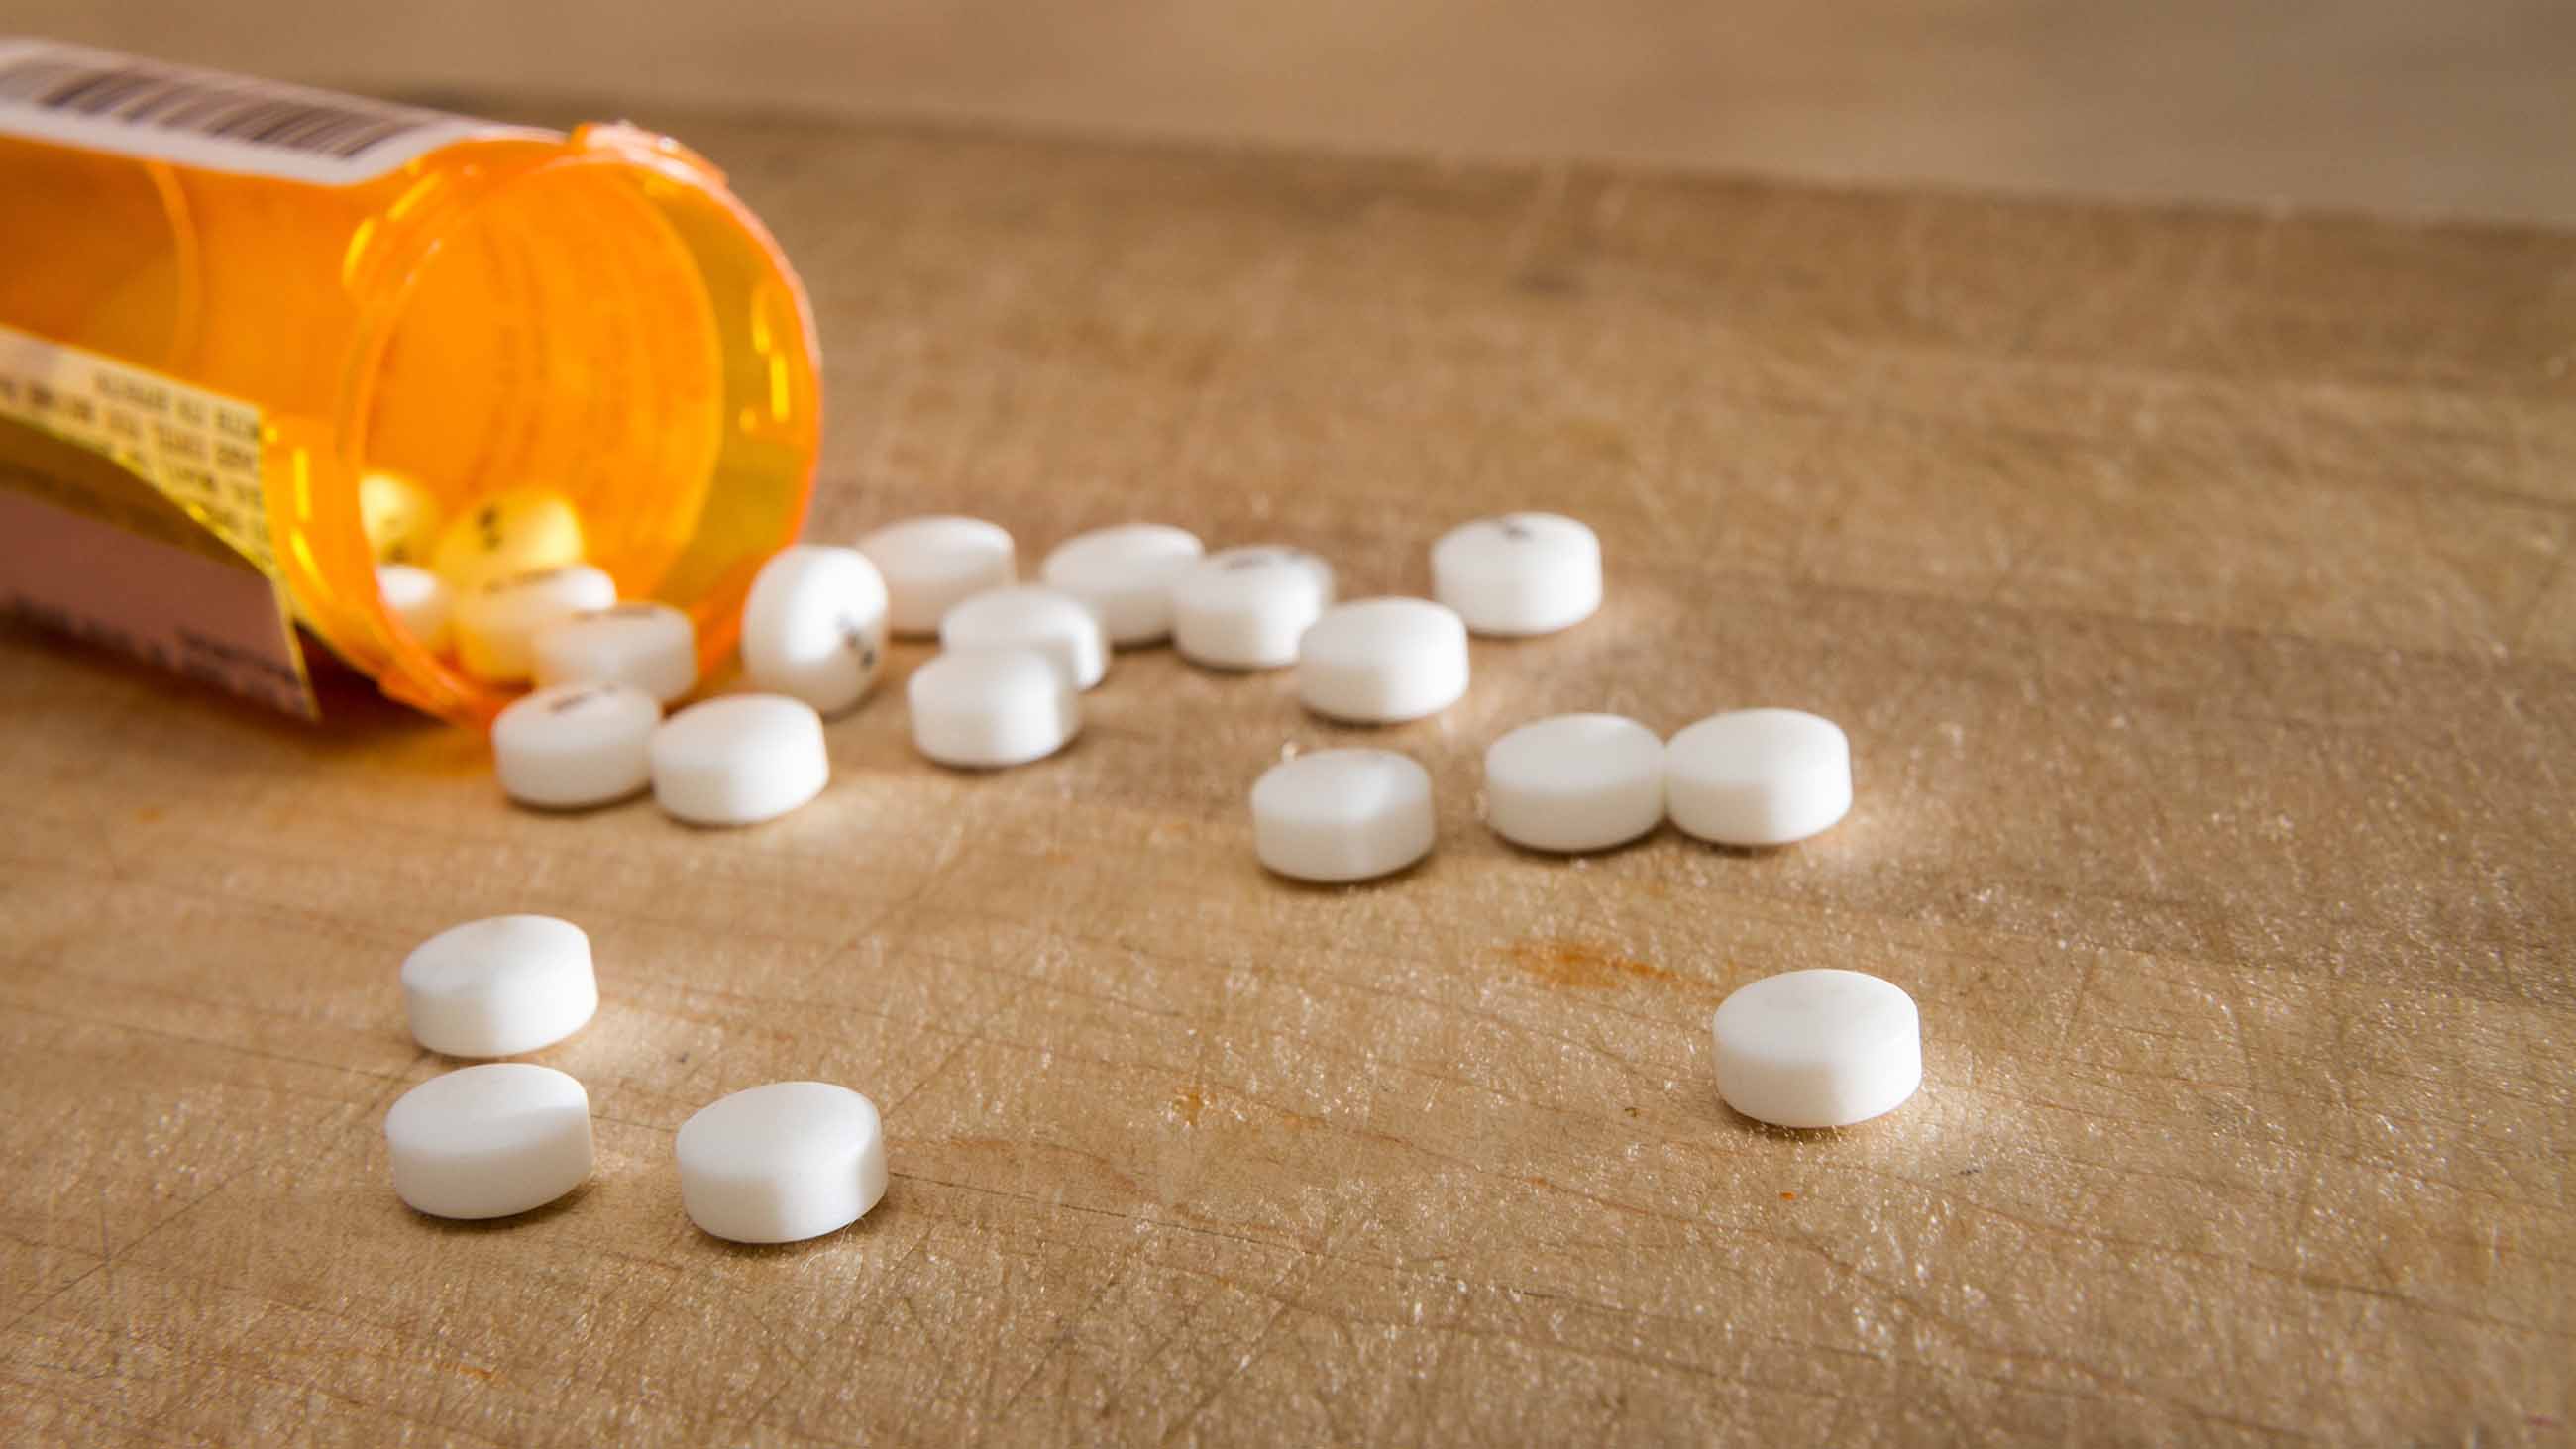 Can stricter prescription drug policies address rising pain levels?